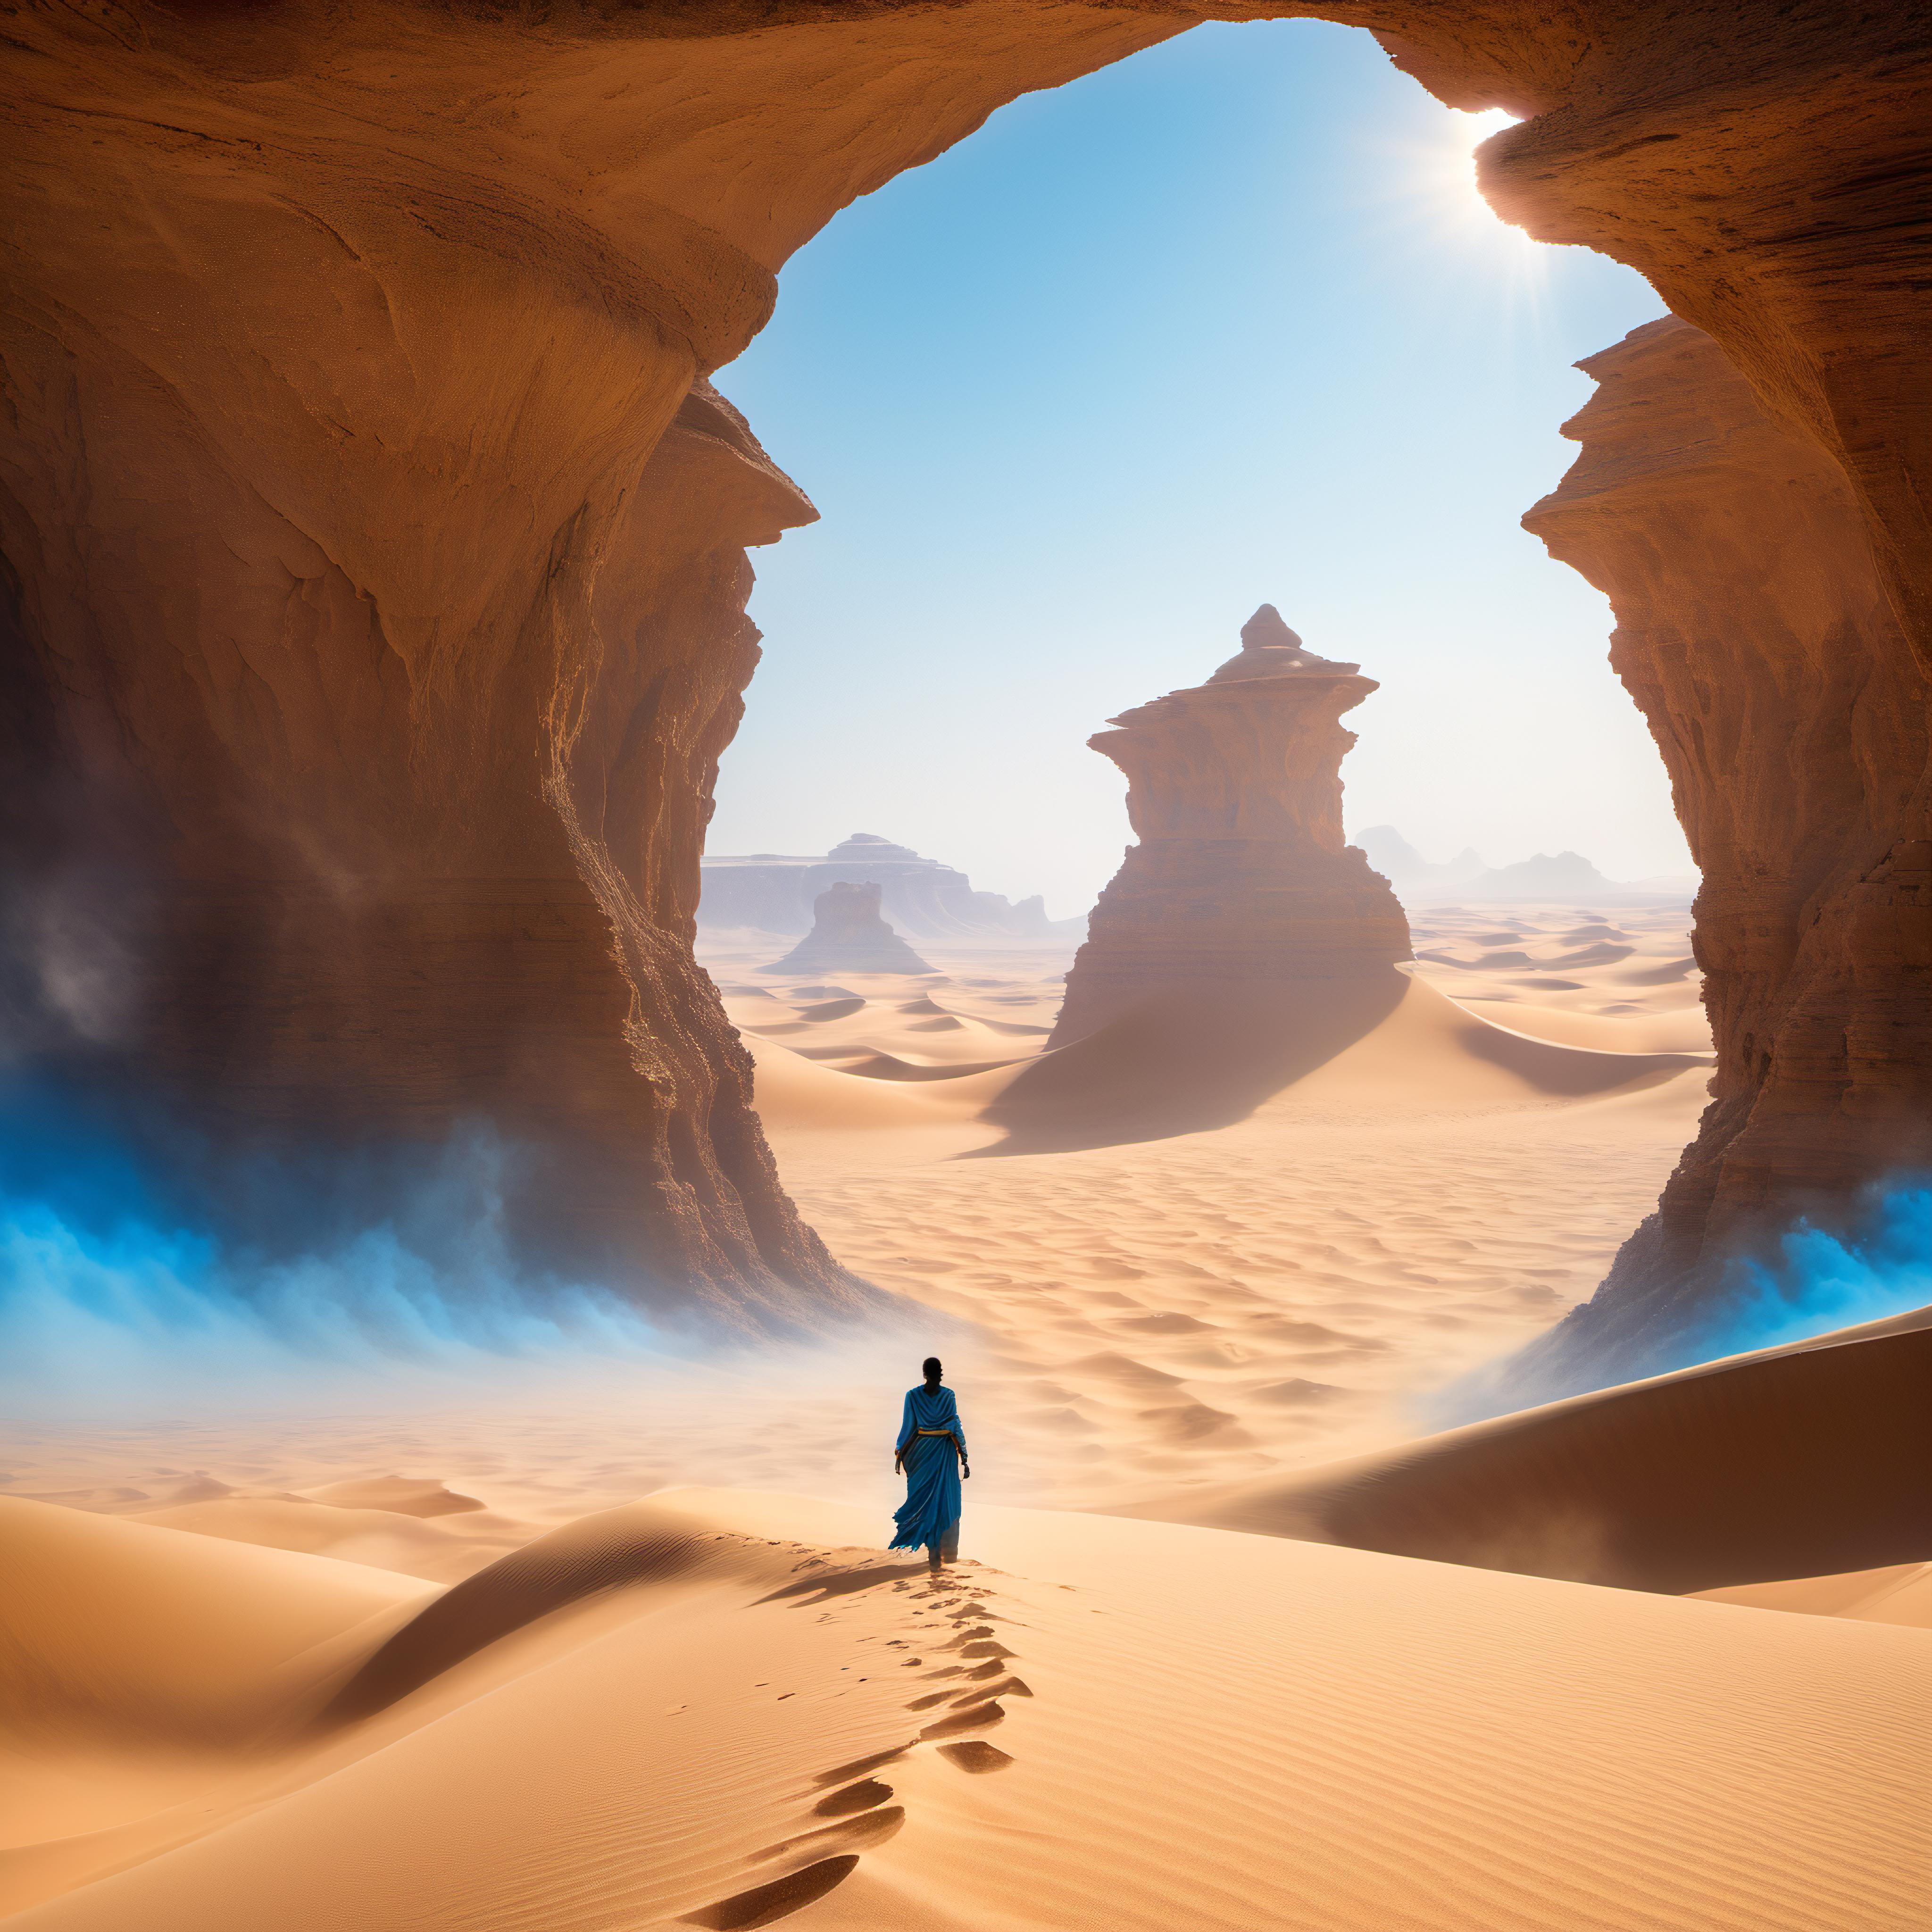 A person walking in a desert with sand dunes and rock formations in the background.